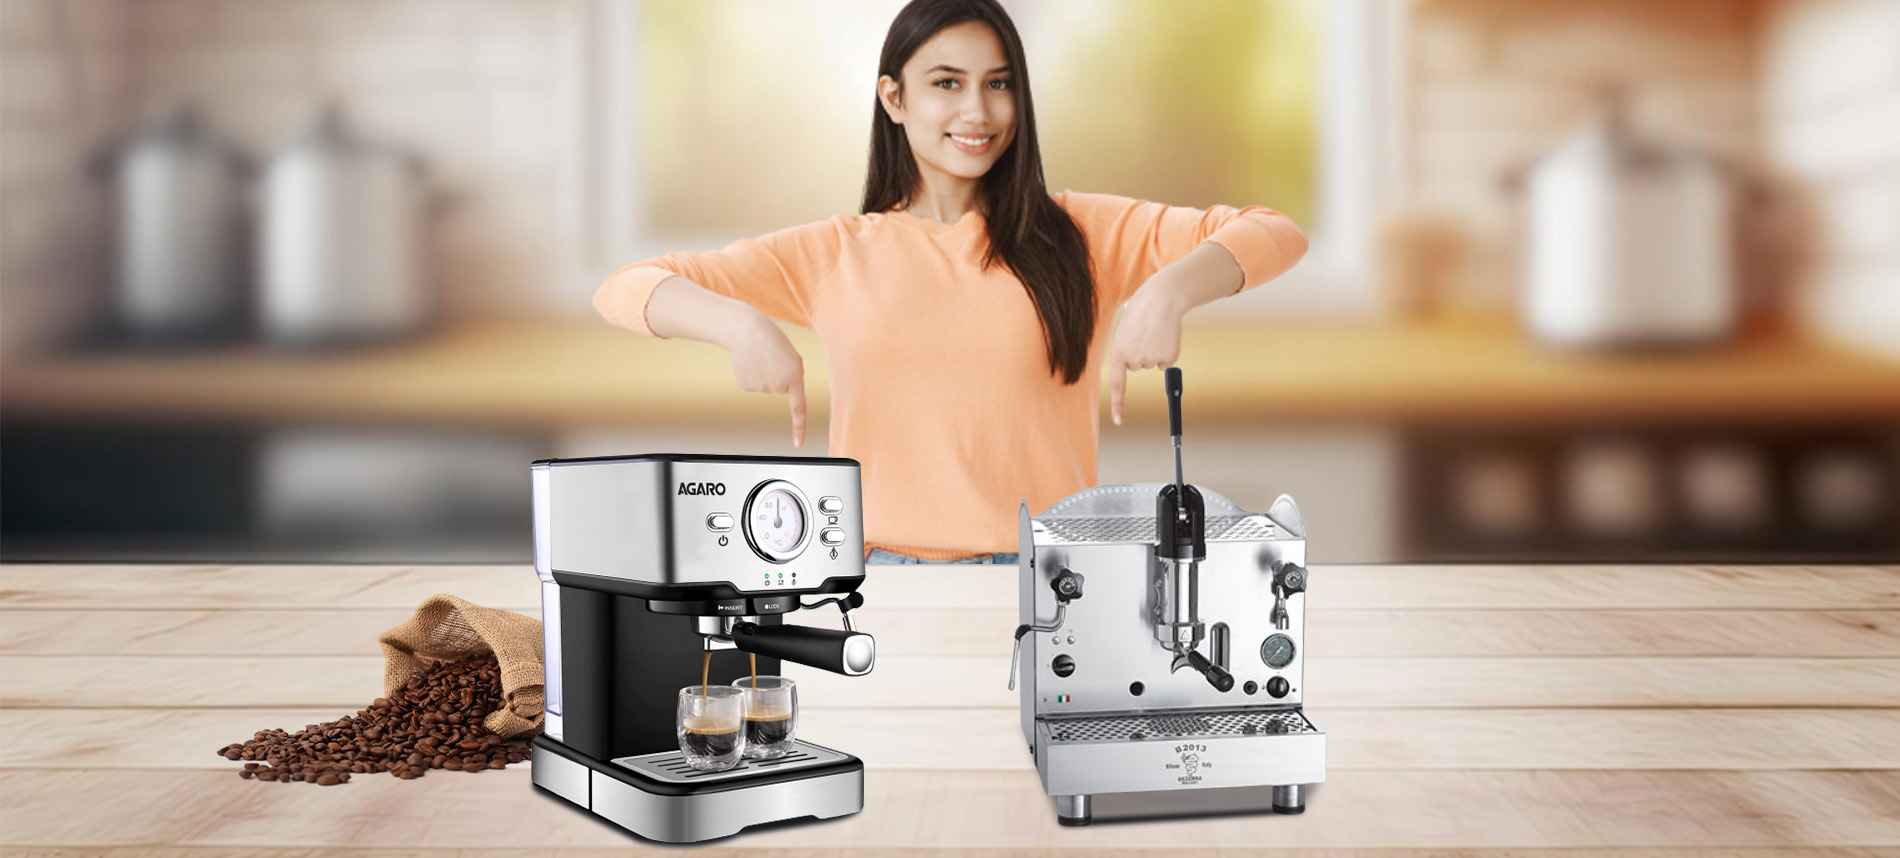 https://agarolifestyle.com/cdn/shop/articles/Automatic_Coffee_Machines_vs_Manual_Which_Brewing_Method_Produces_the_Best_Cup_of_Coffee_c59c8a1f-8984-4b7a-b212-31373ce6249d.jpg?v=1691834925